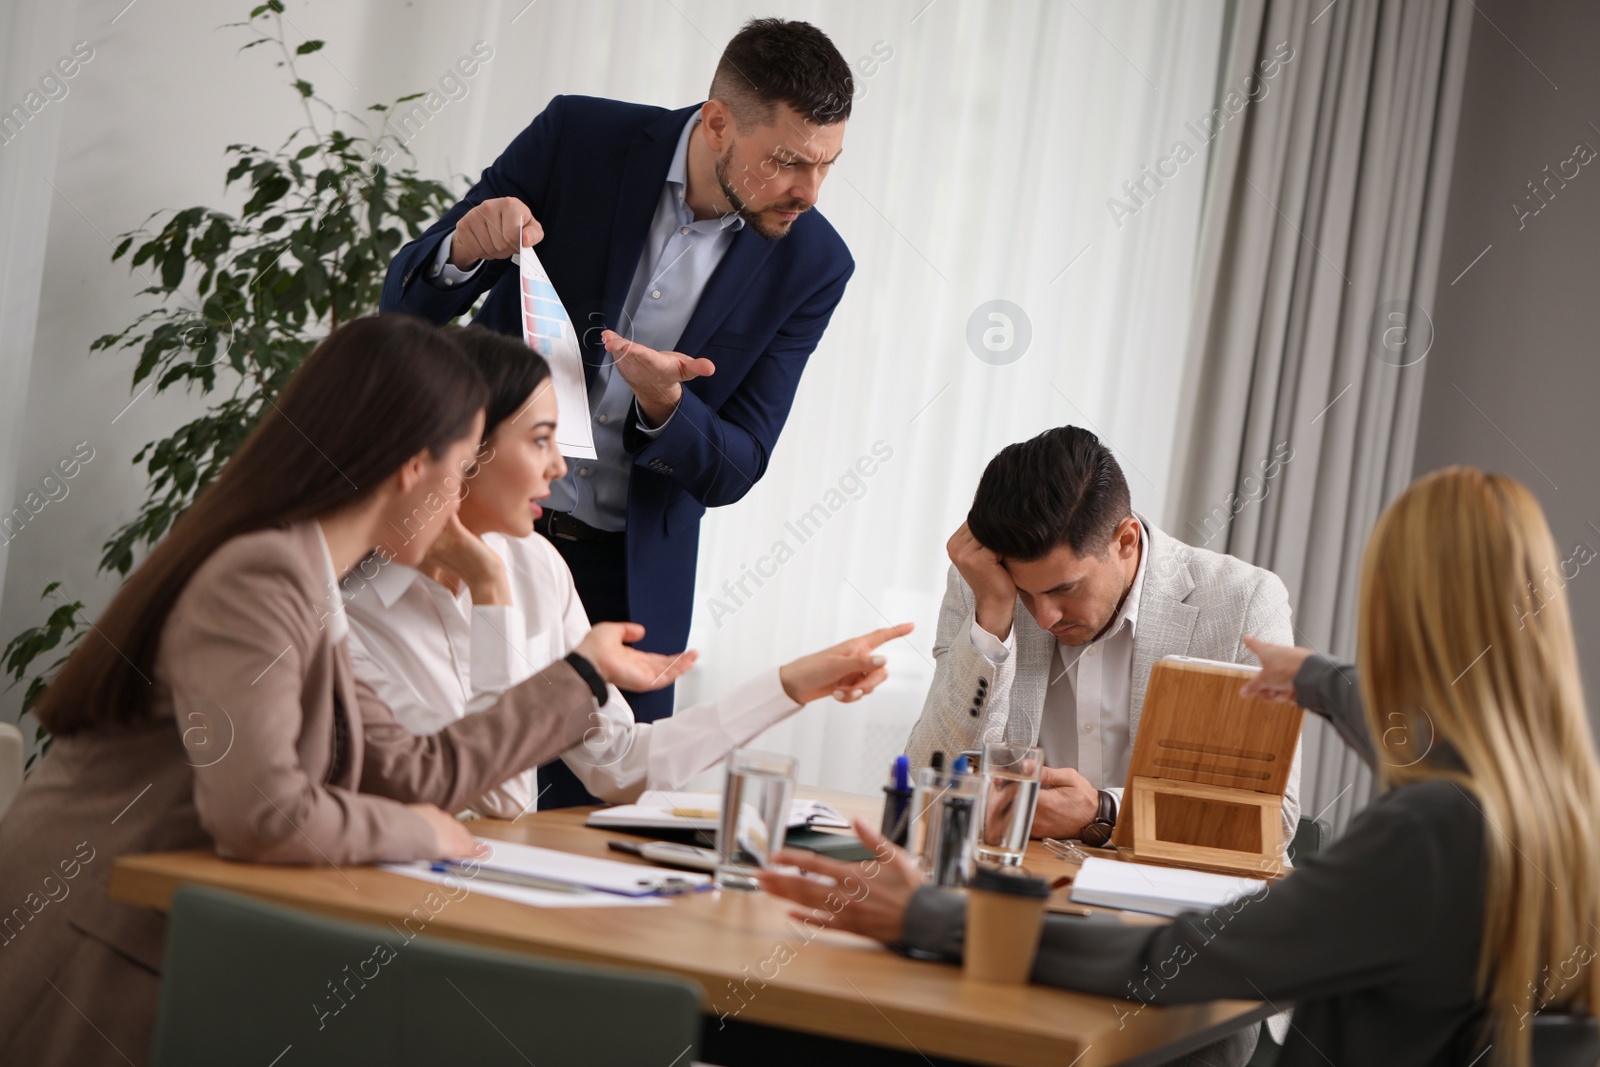 Photo of Boss scolding employee at workplace in office